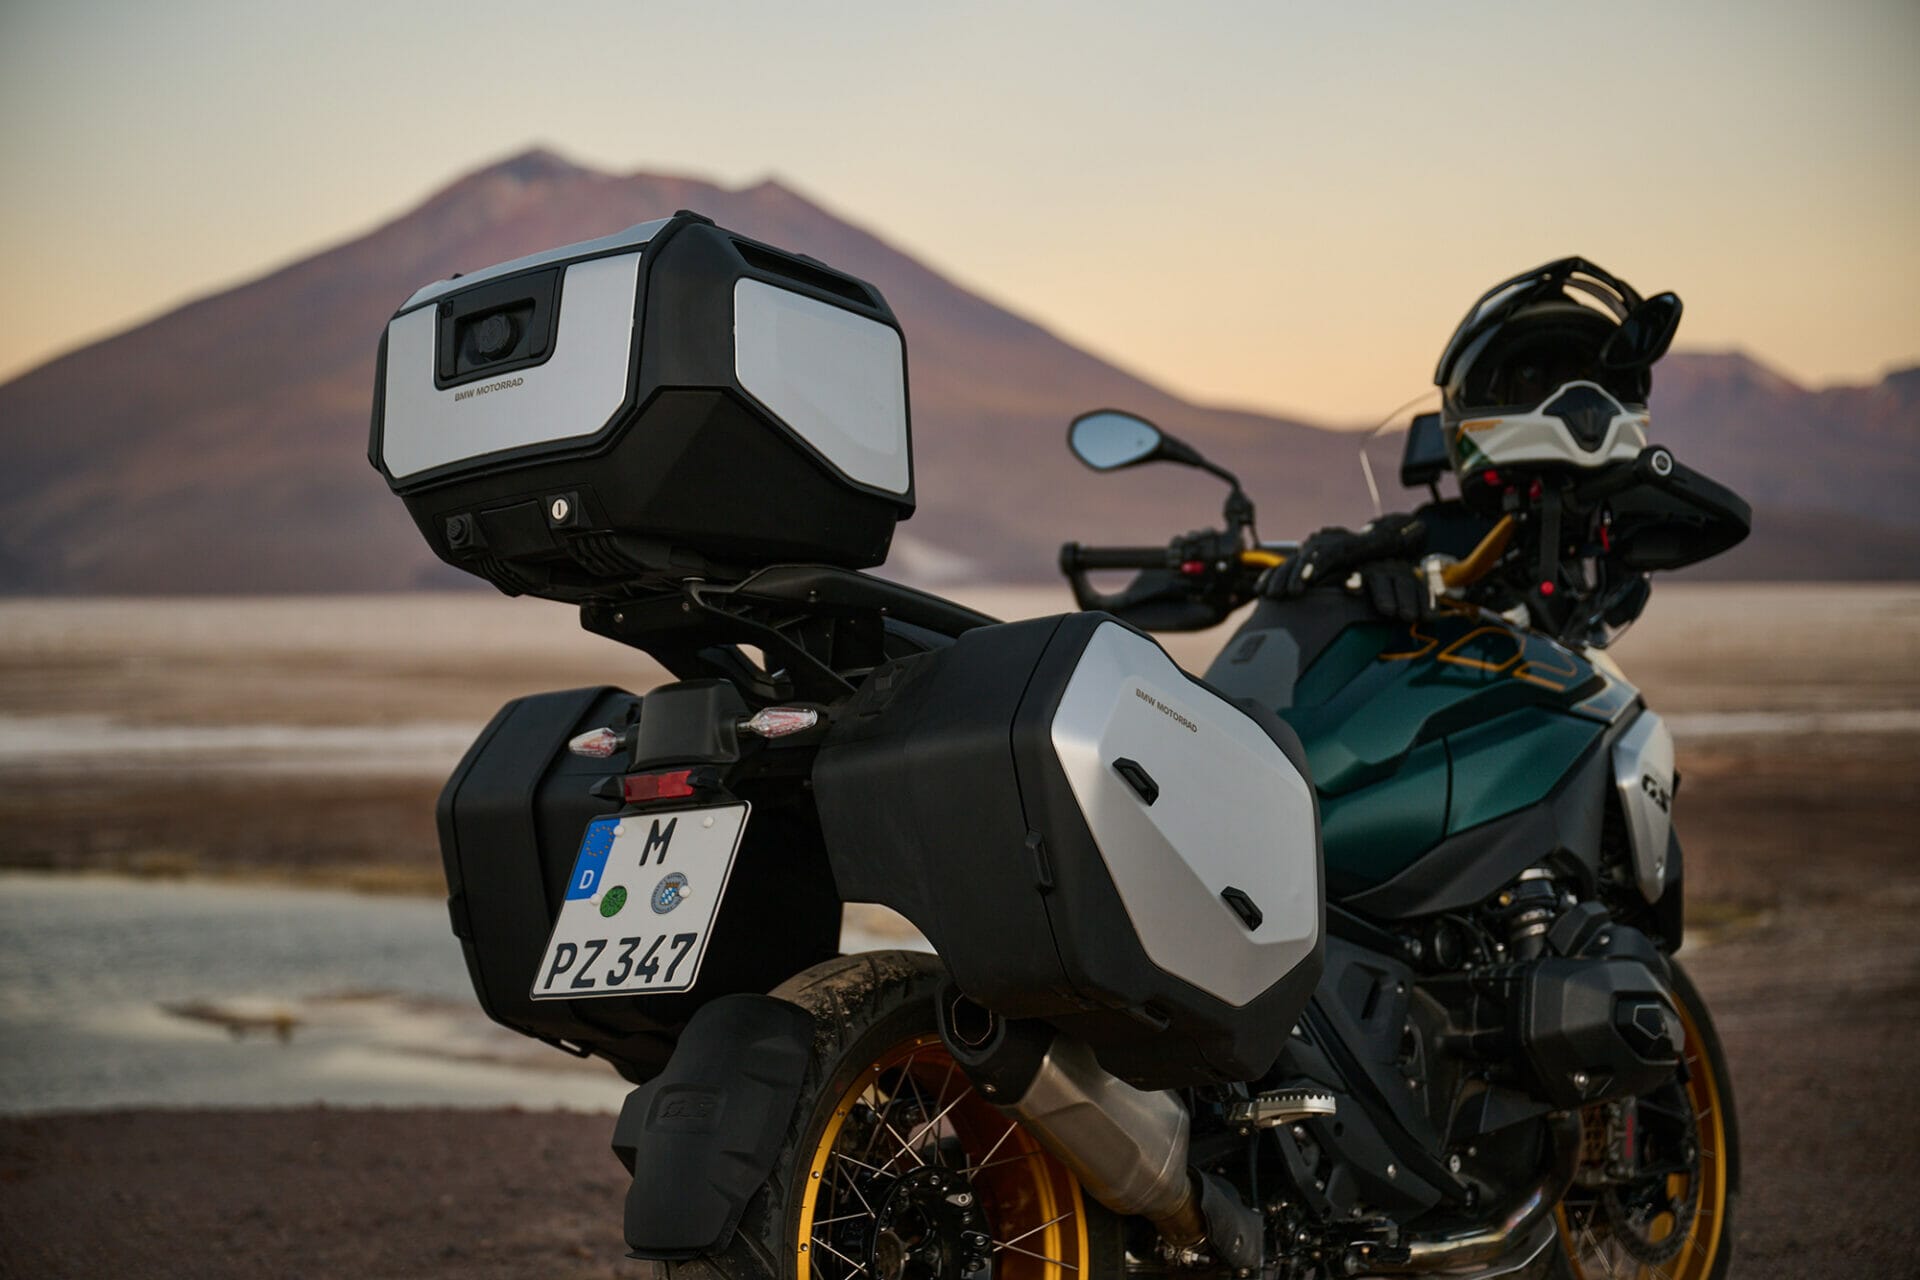 BMW recalls the R 1300 GS in America because of suitcases